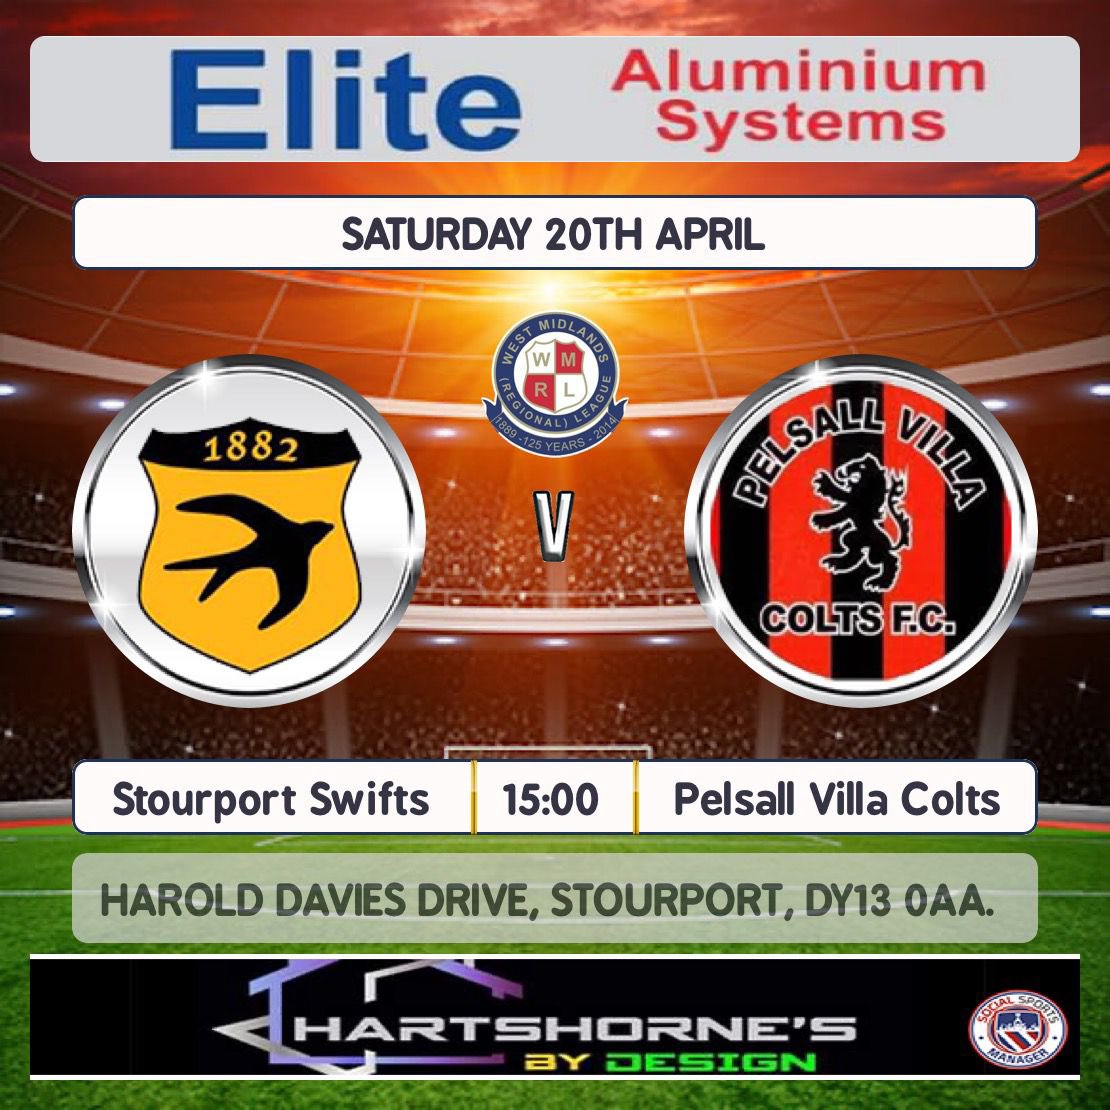 Next Up 🏆 WMRL 1 🆚 Stourport Swifts 🗓 Saturday 20th April ⏰ 15:00 🍻 Bar Open 🏟️ Harold Davies Drive, Stourport, DY13 0AA 🎟 Adults £5 Concession £3